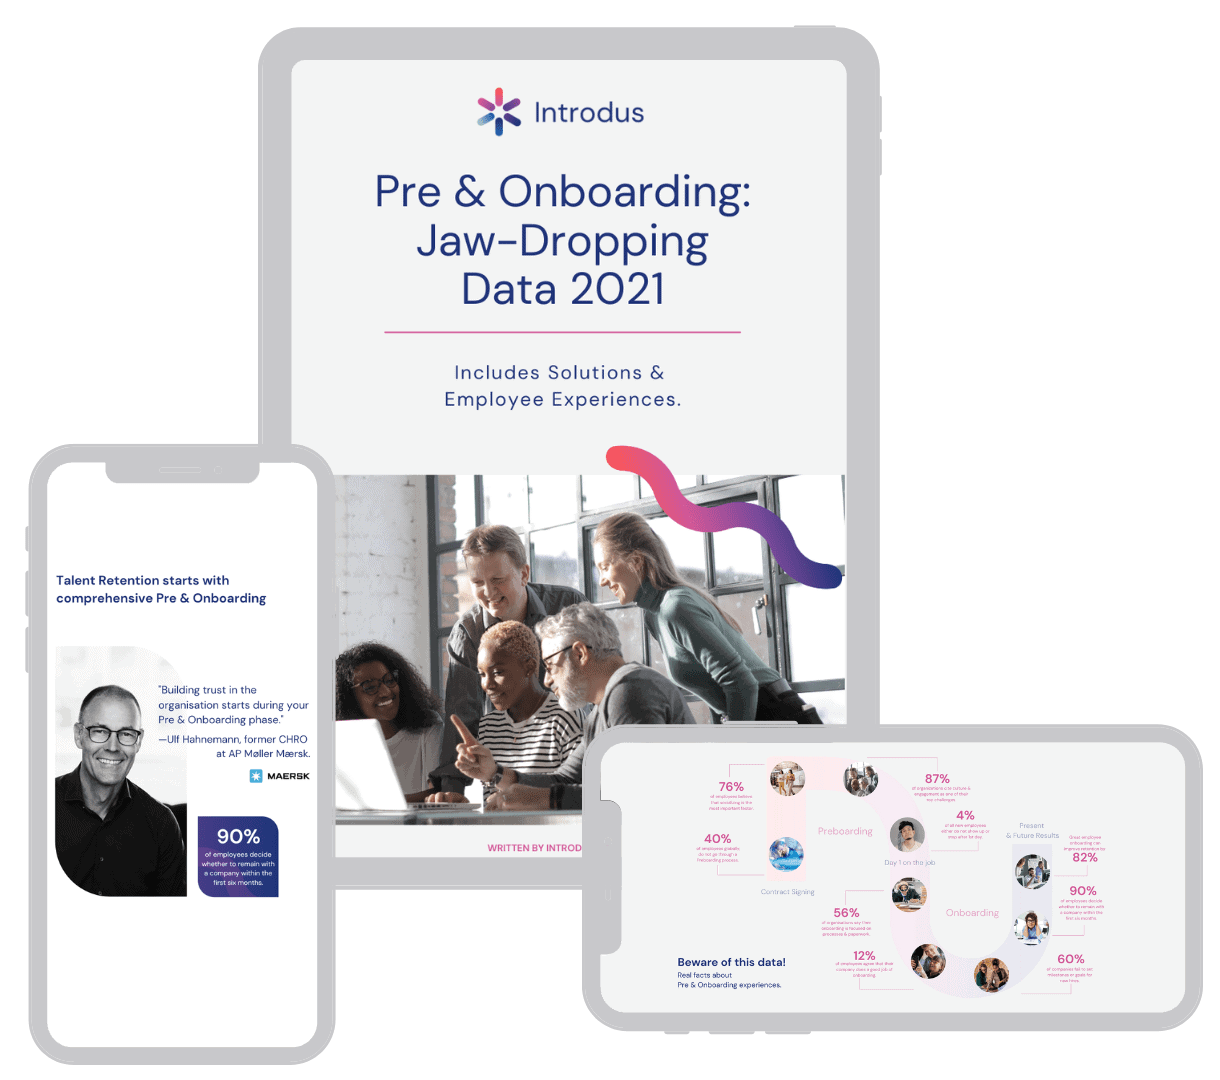 Pre & Onboarding: Jaw-Dropping Data 2021